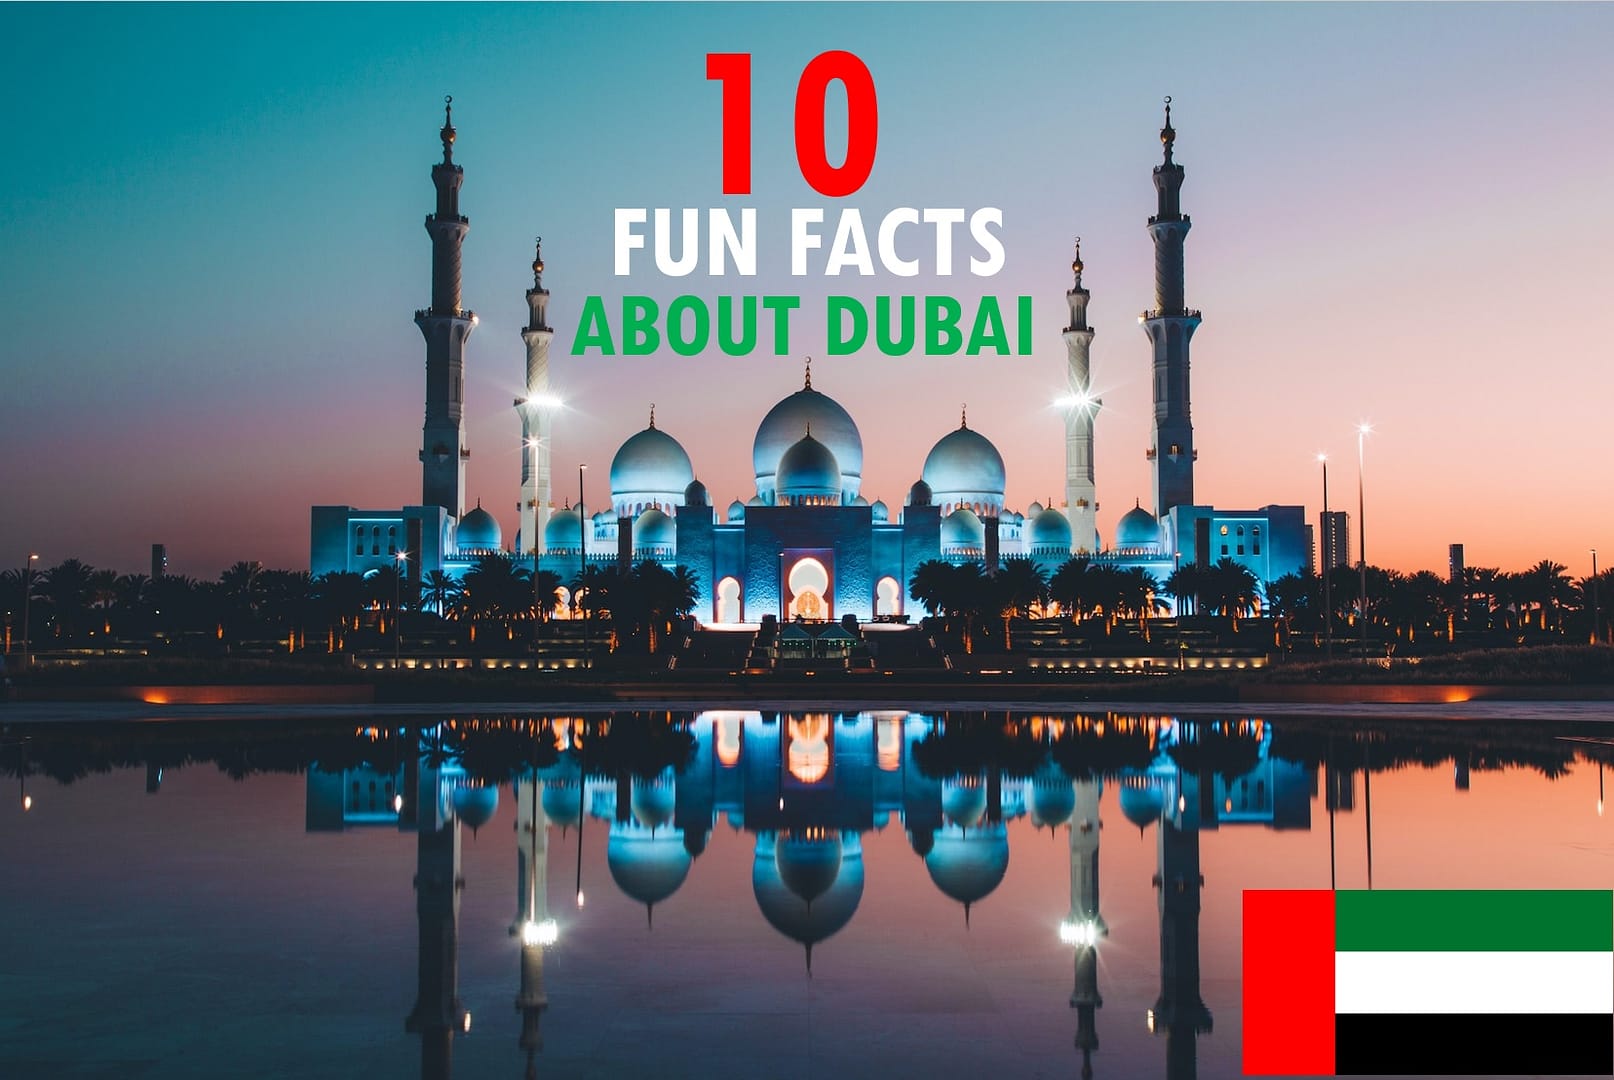 10 FUN FACTS ABOUT DUBAI - POST COVER PICTURE